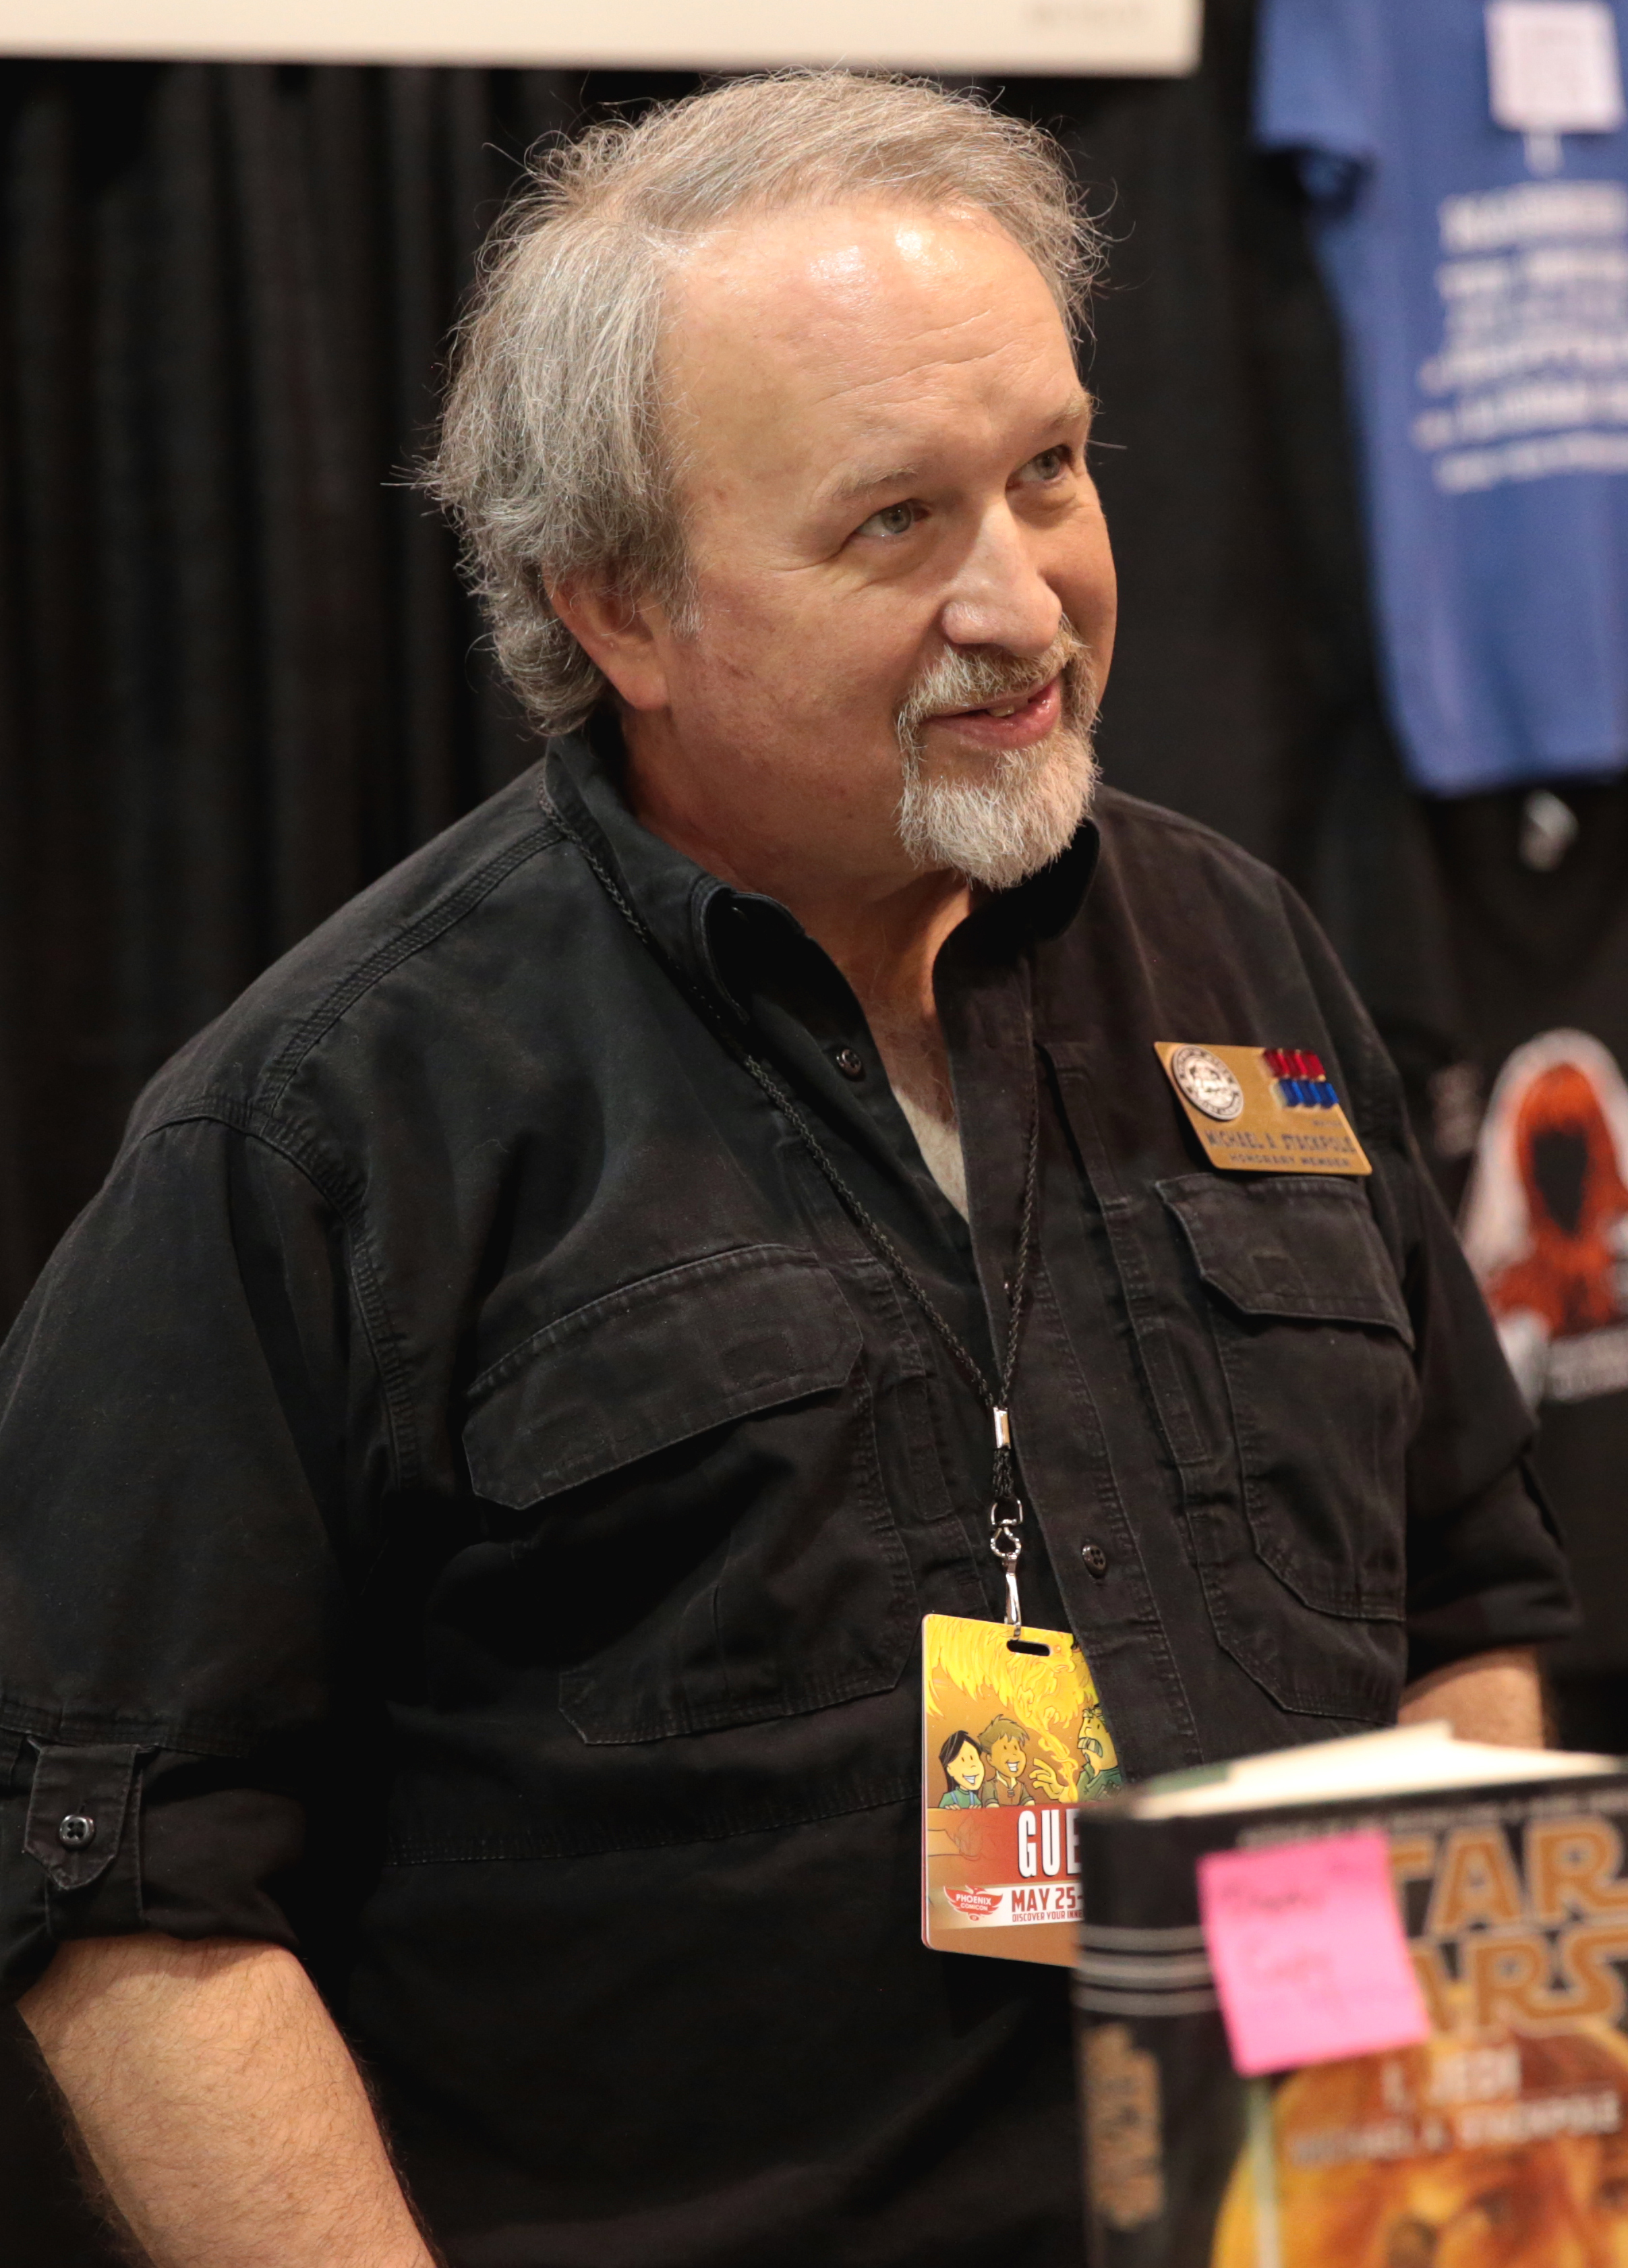 Stackpole at the 2017 [[Phoenix Comicon]]